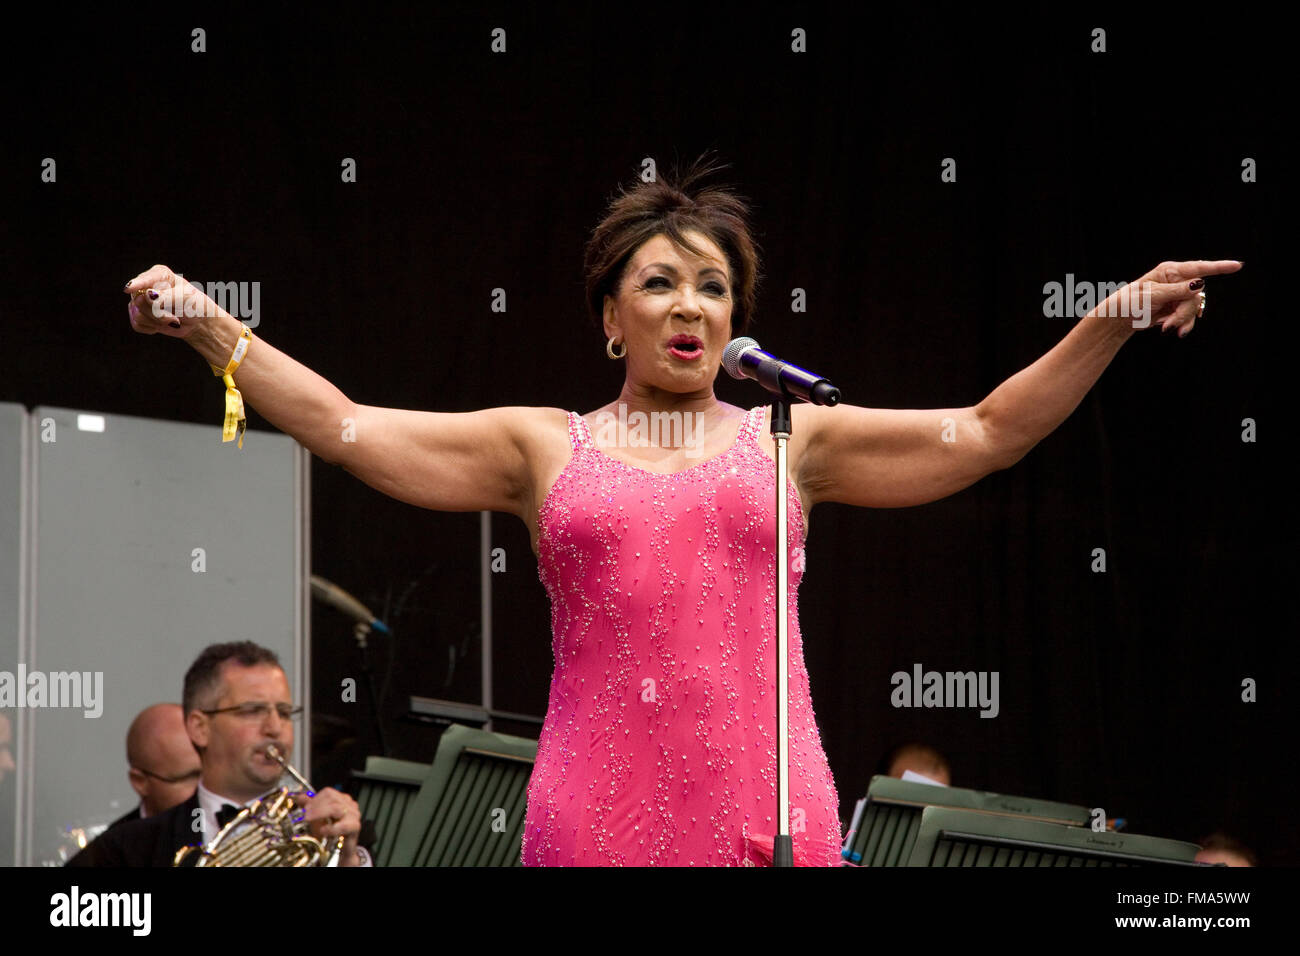 Dame Shirley Bassey performing on the Pyramid stage at the Glastonbury festival  2007, Somerset, England, United Kingdom. Stock Photo